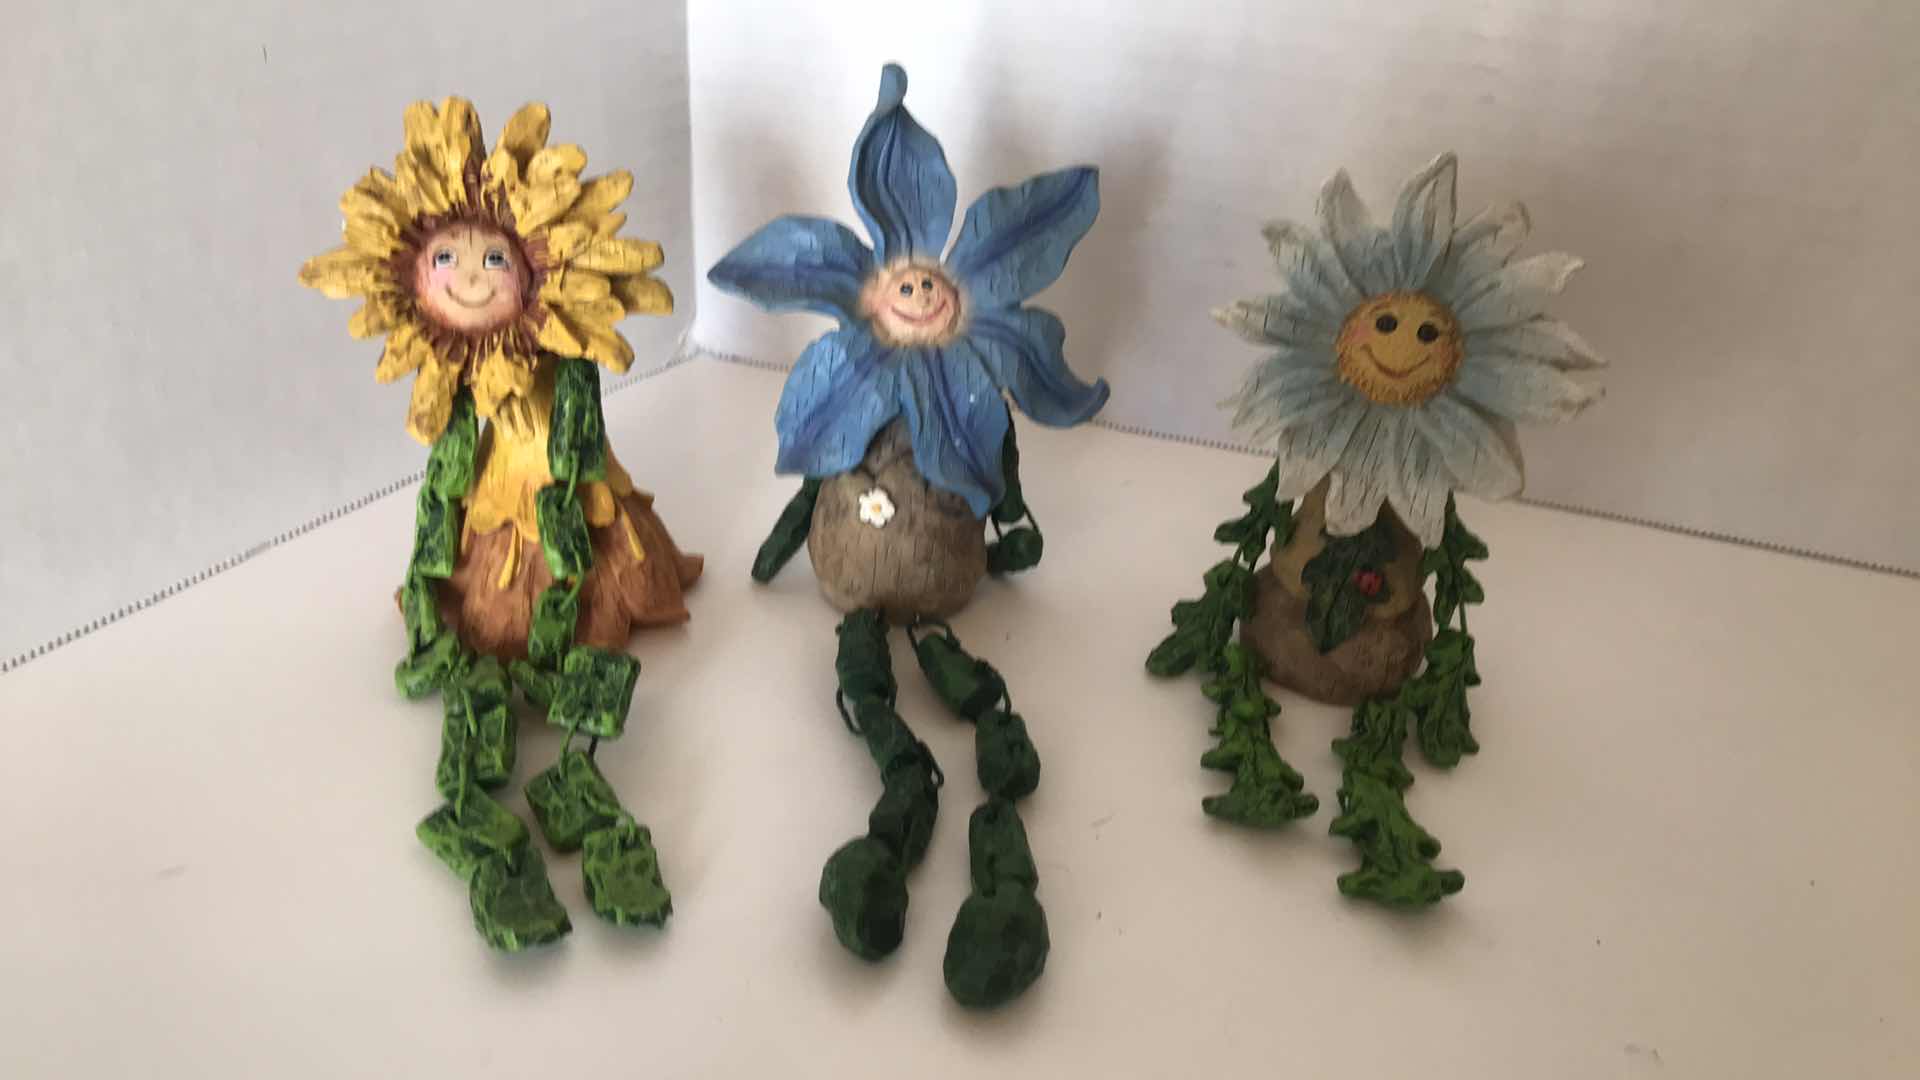 Photo 1 of 3 CERAMIC FLOWER CHARACTERS WITH VINE ARMS AND LEGS, APPROX 5” SITTING